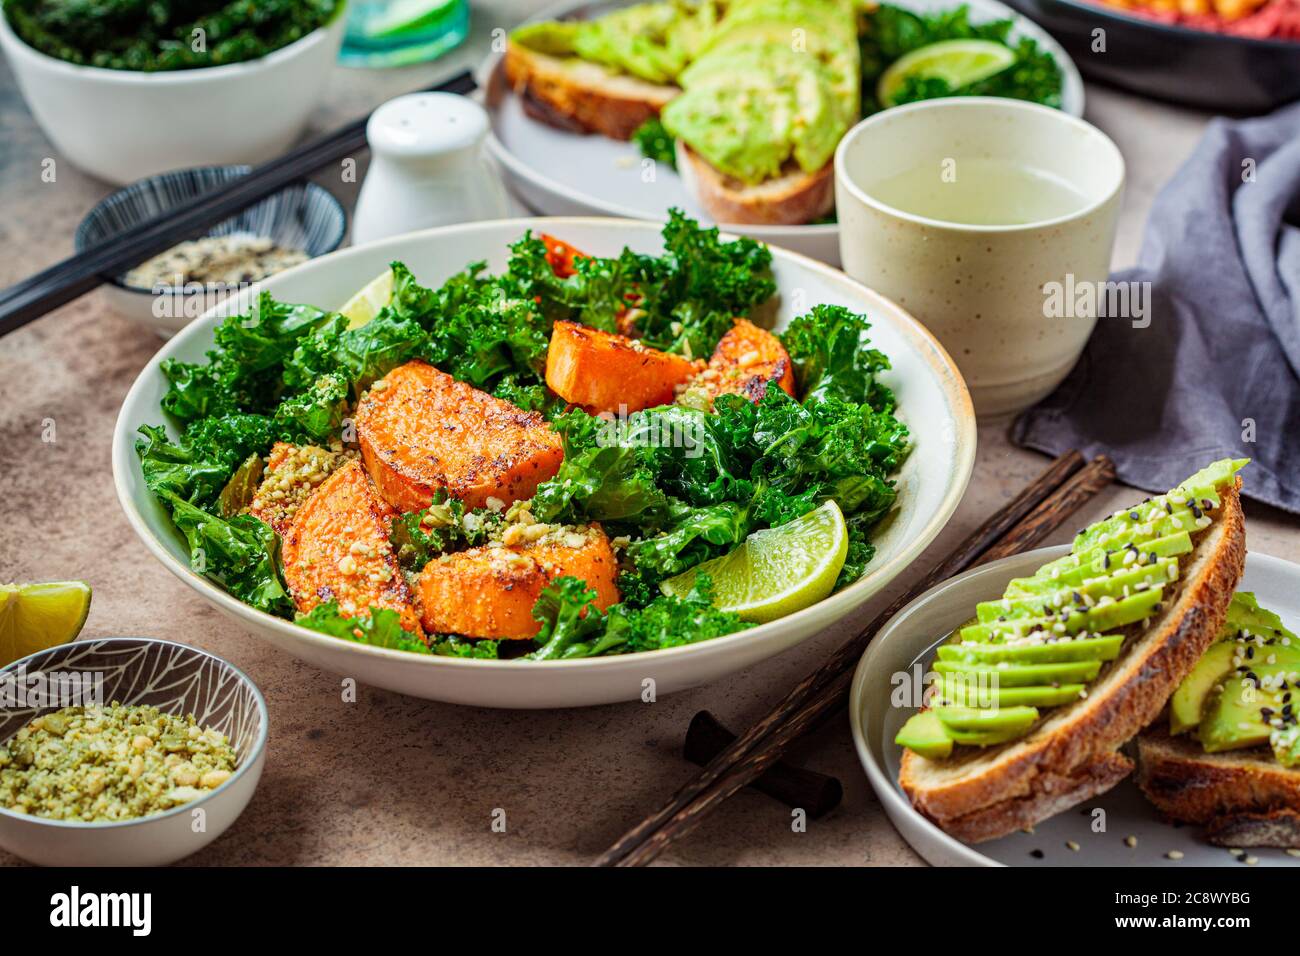 Vegan lunch table. Baked sweet potato salad with kale, avocado toast and hummus on a dark background. Stock Photo